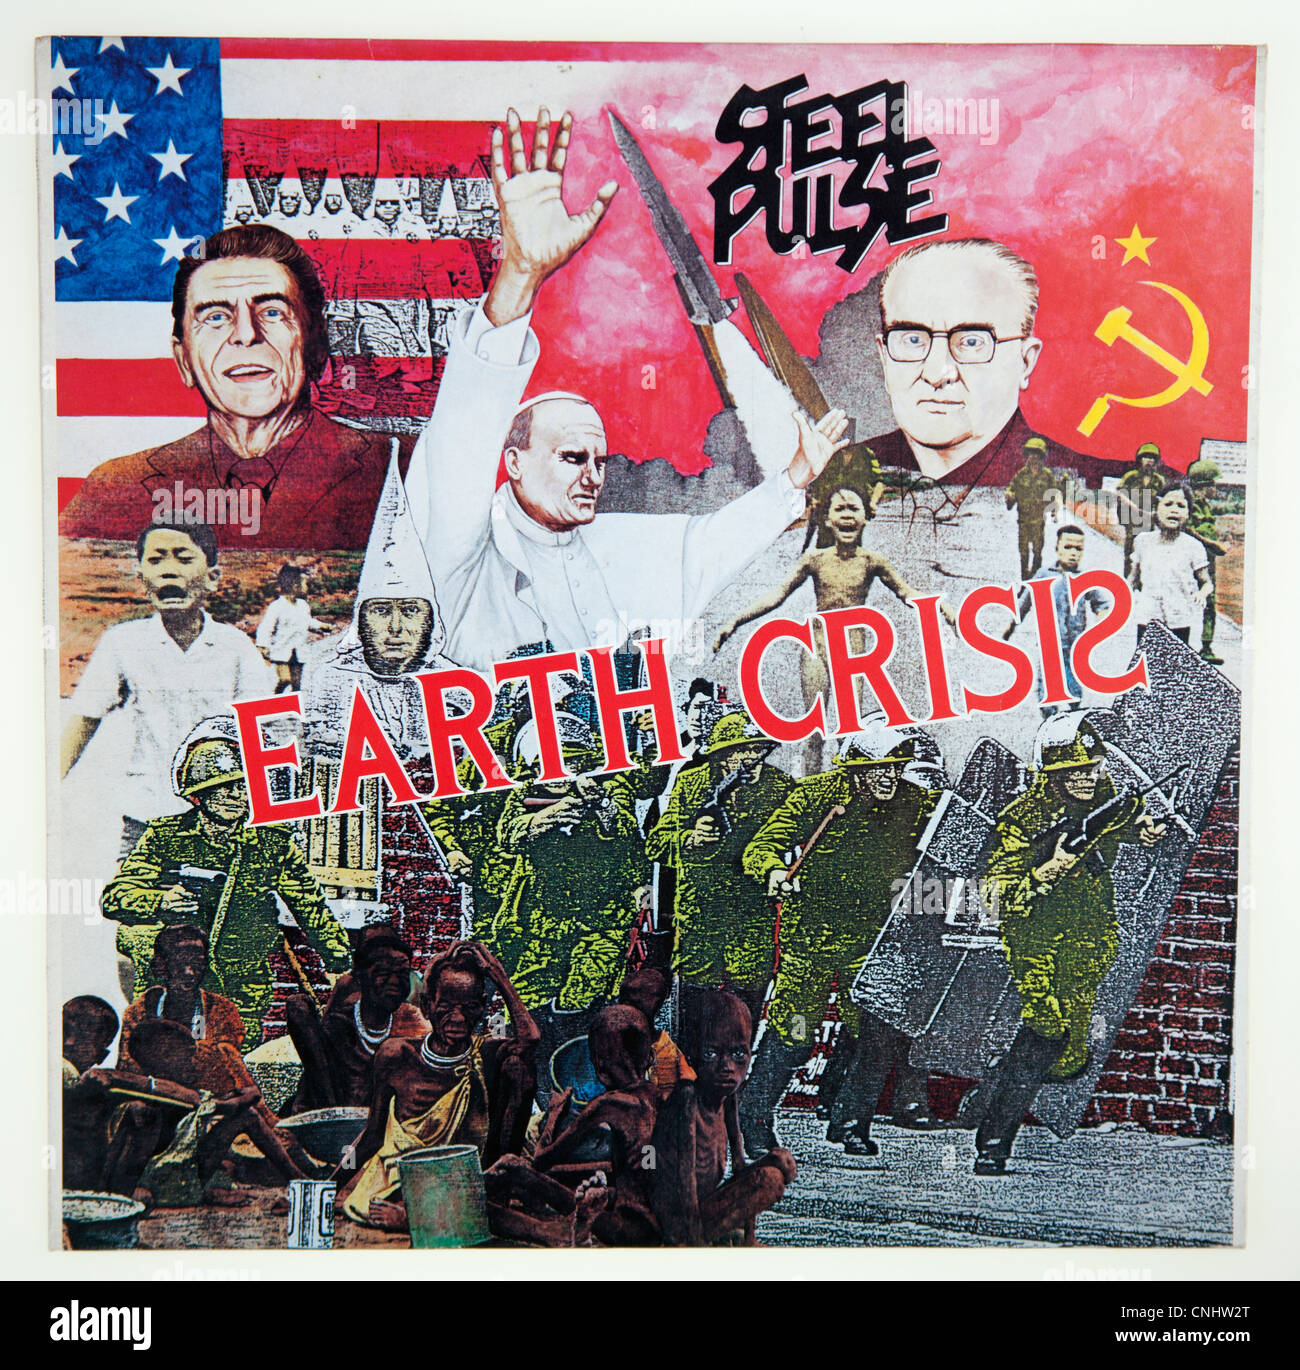 Cover of vinyl album 'Earth Crisis' by Steel Pulse released 1984 Stock Photo